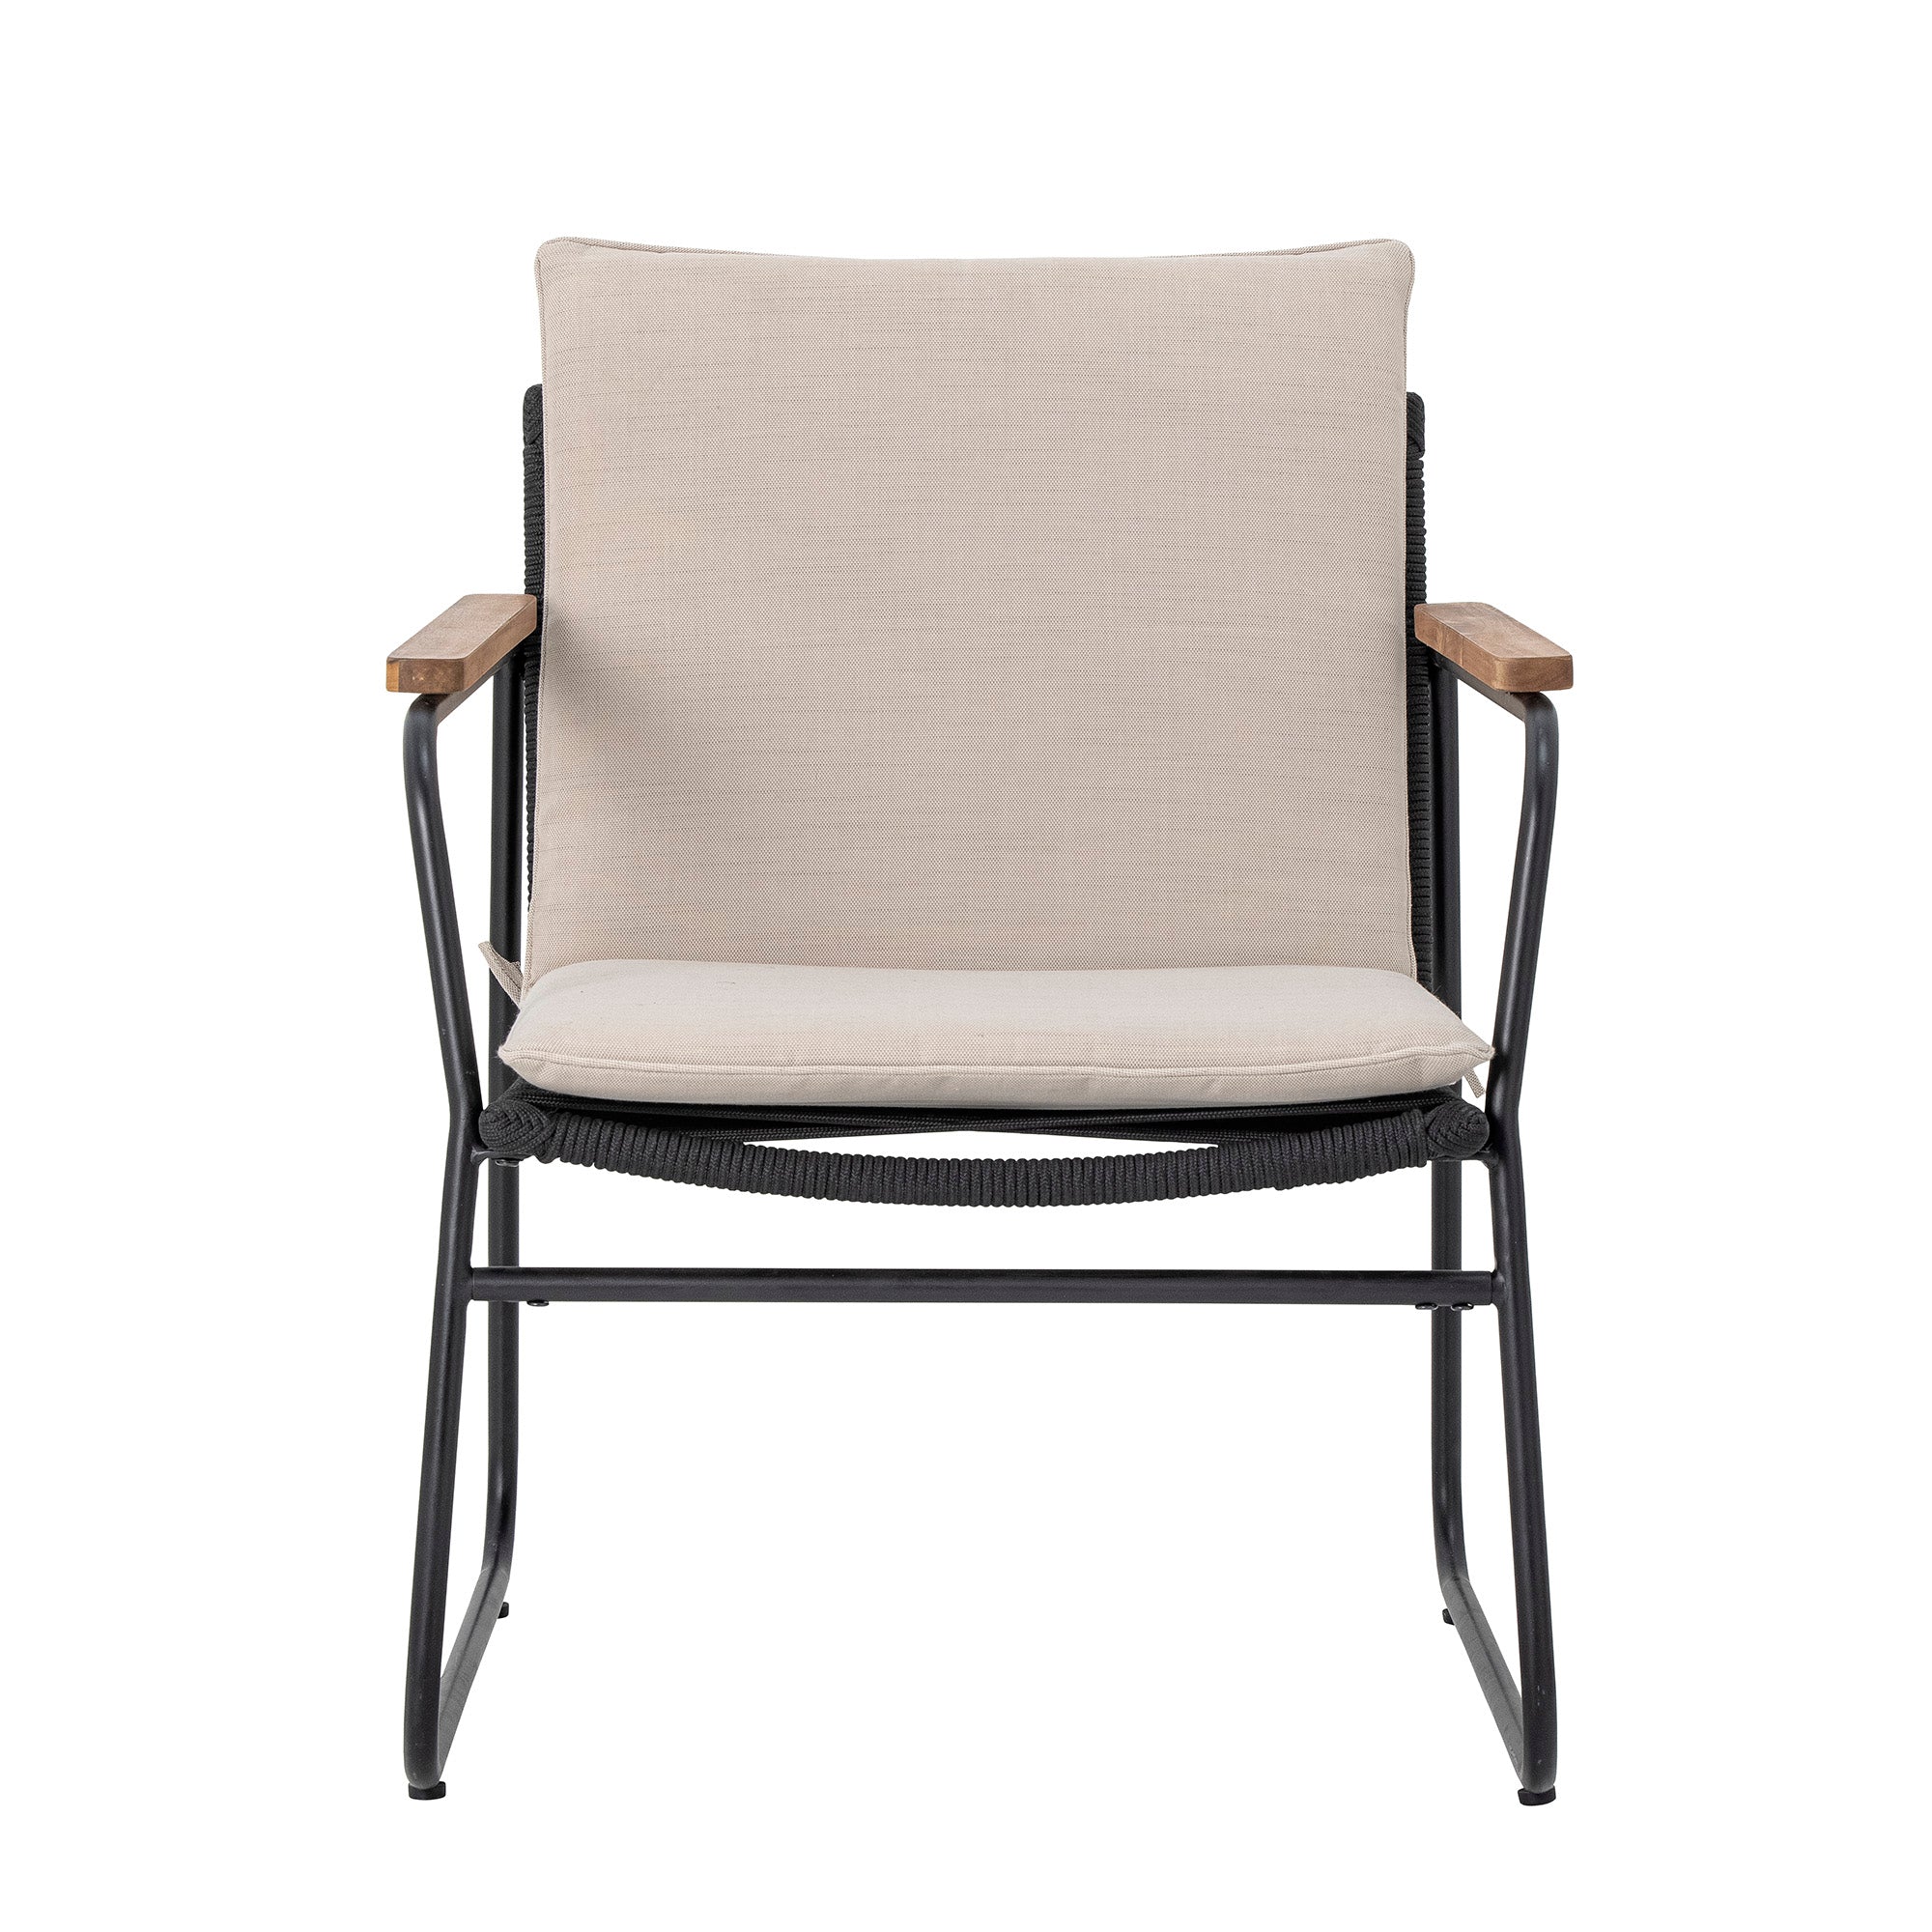 Outdoor chair with armrests